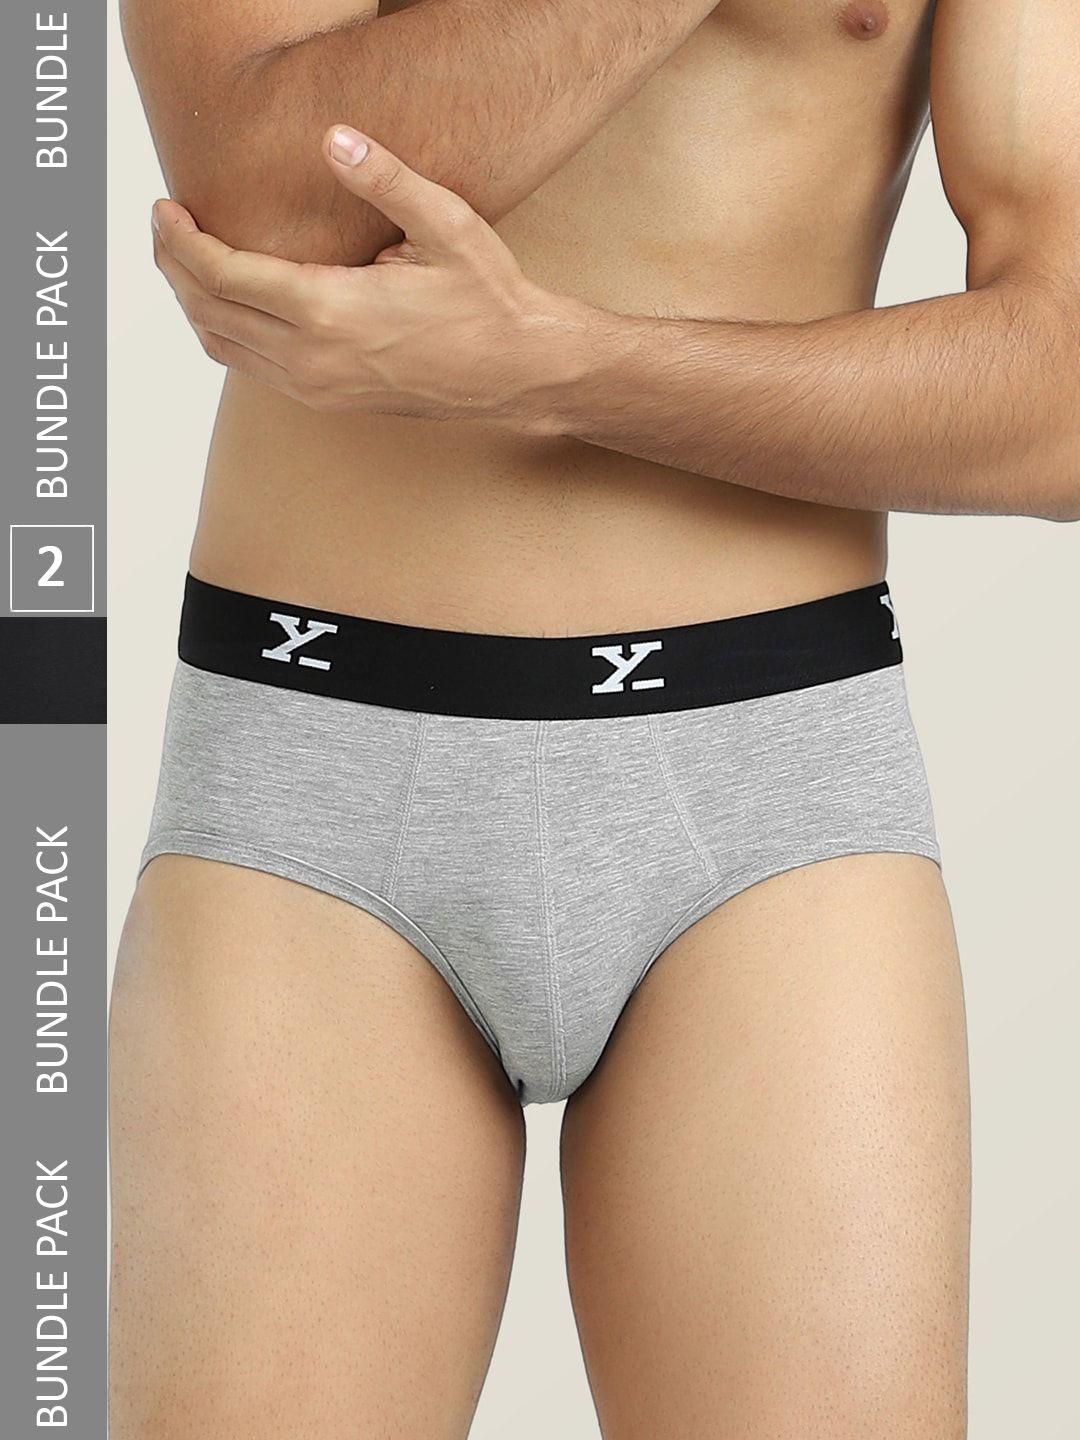 xyxx men pack of 2 intellisoft antimicrobial micro modal dualist briefs xybrf2pckn607